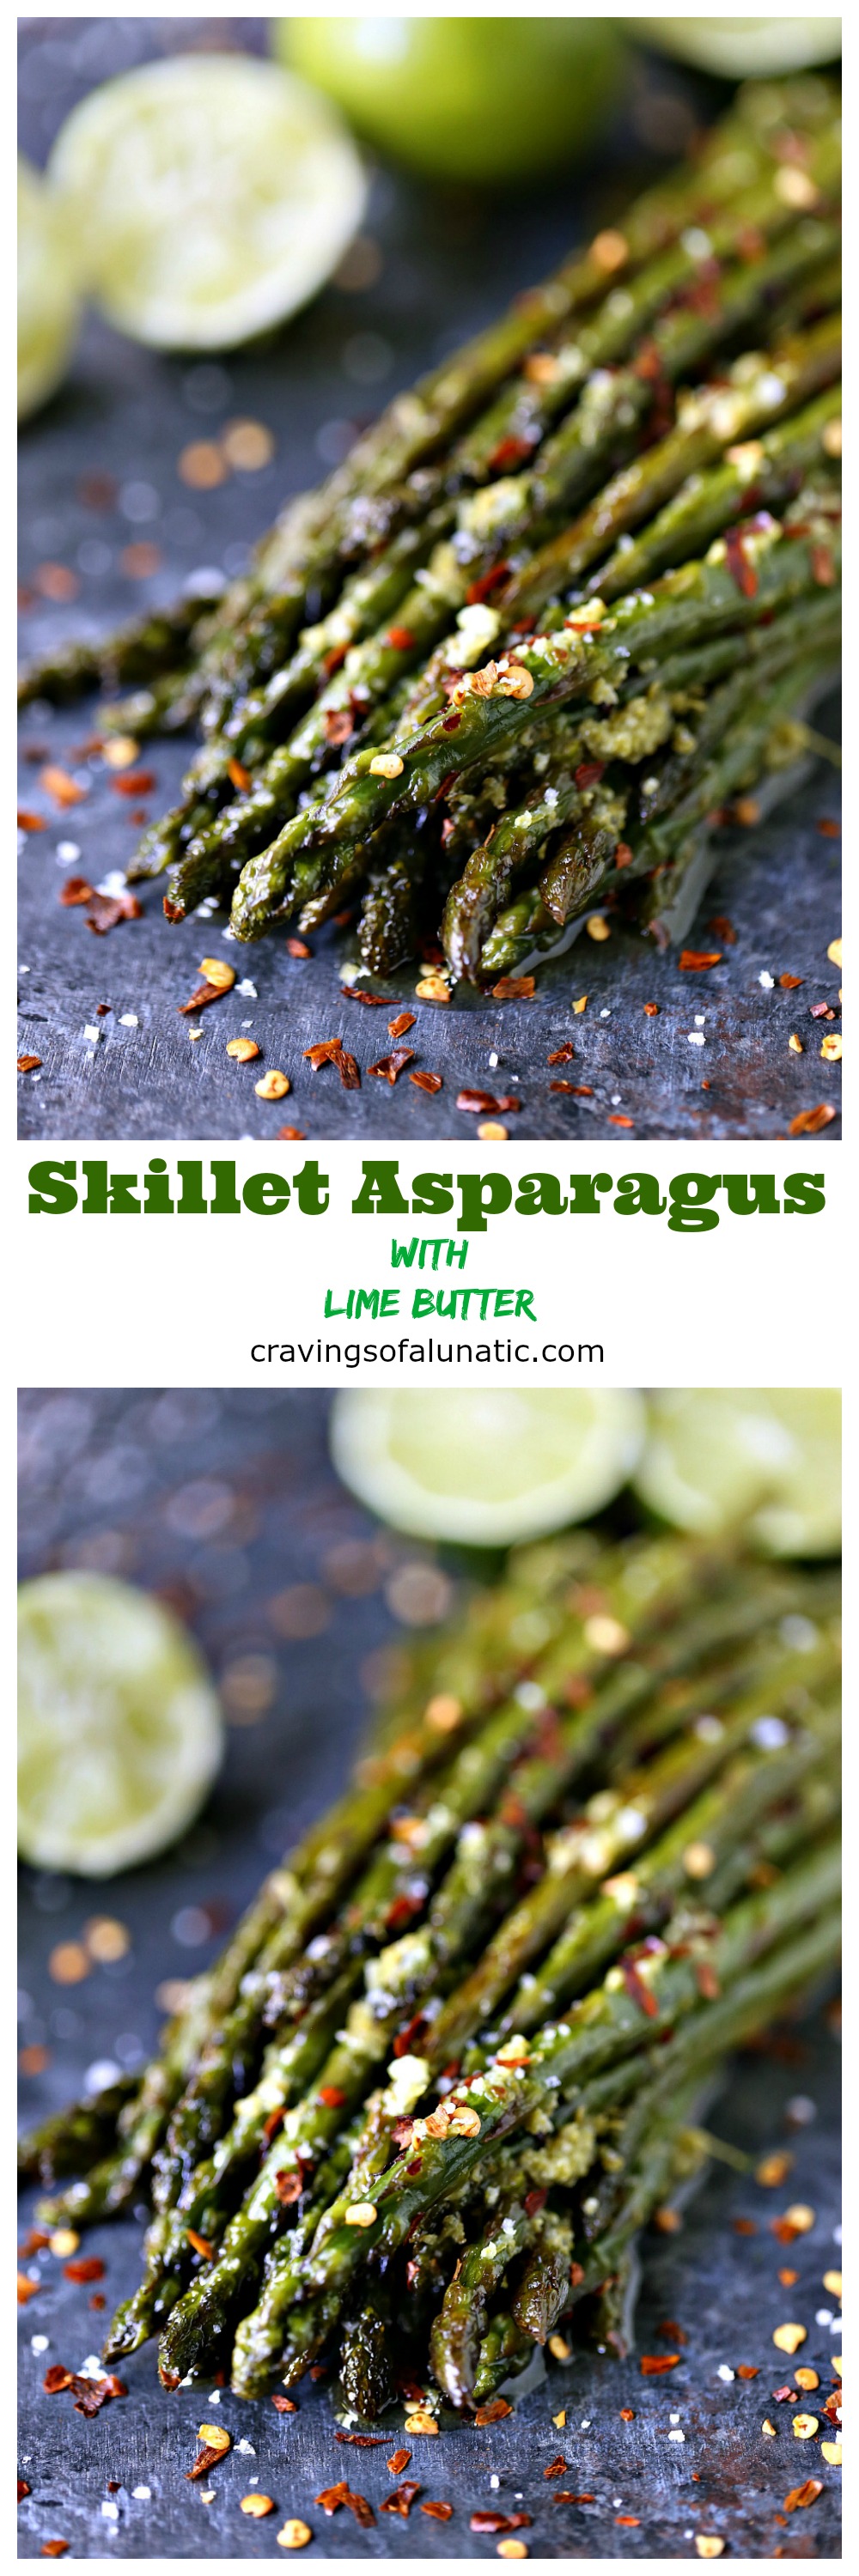 Skillet Asparagus with Lime Butter from cravingsofalunatic.com- Asparagus season is full swing so enjoy every minute of it. This skillet asparagus is a quick and tasty side dish that will get rave reviews. My family voted it the "Best Asparagus Ever"!